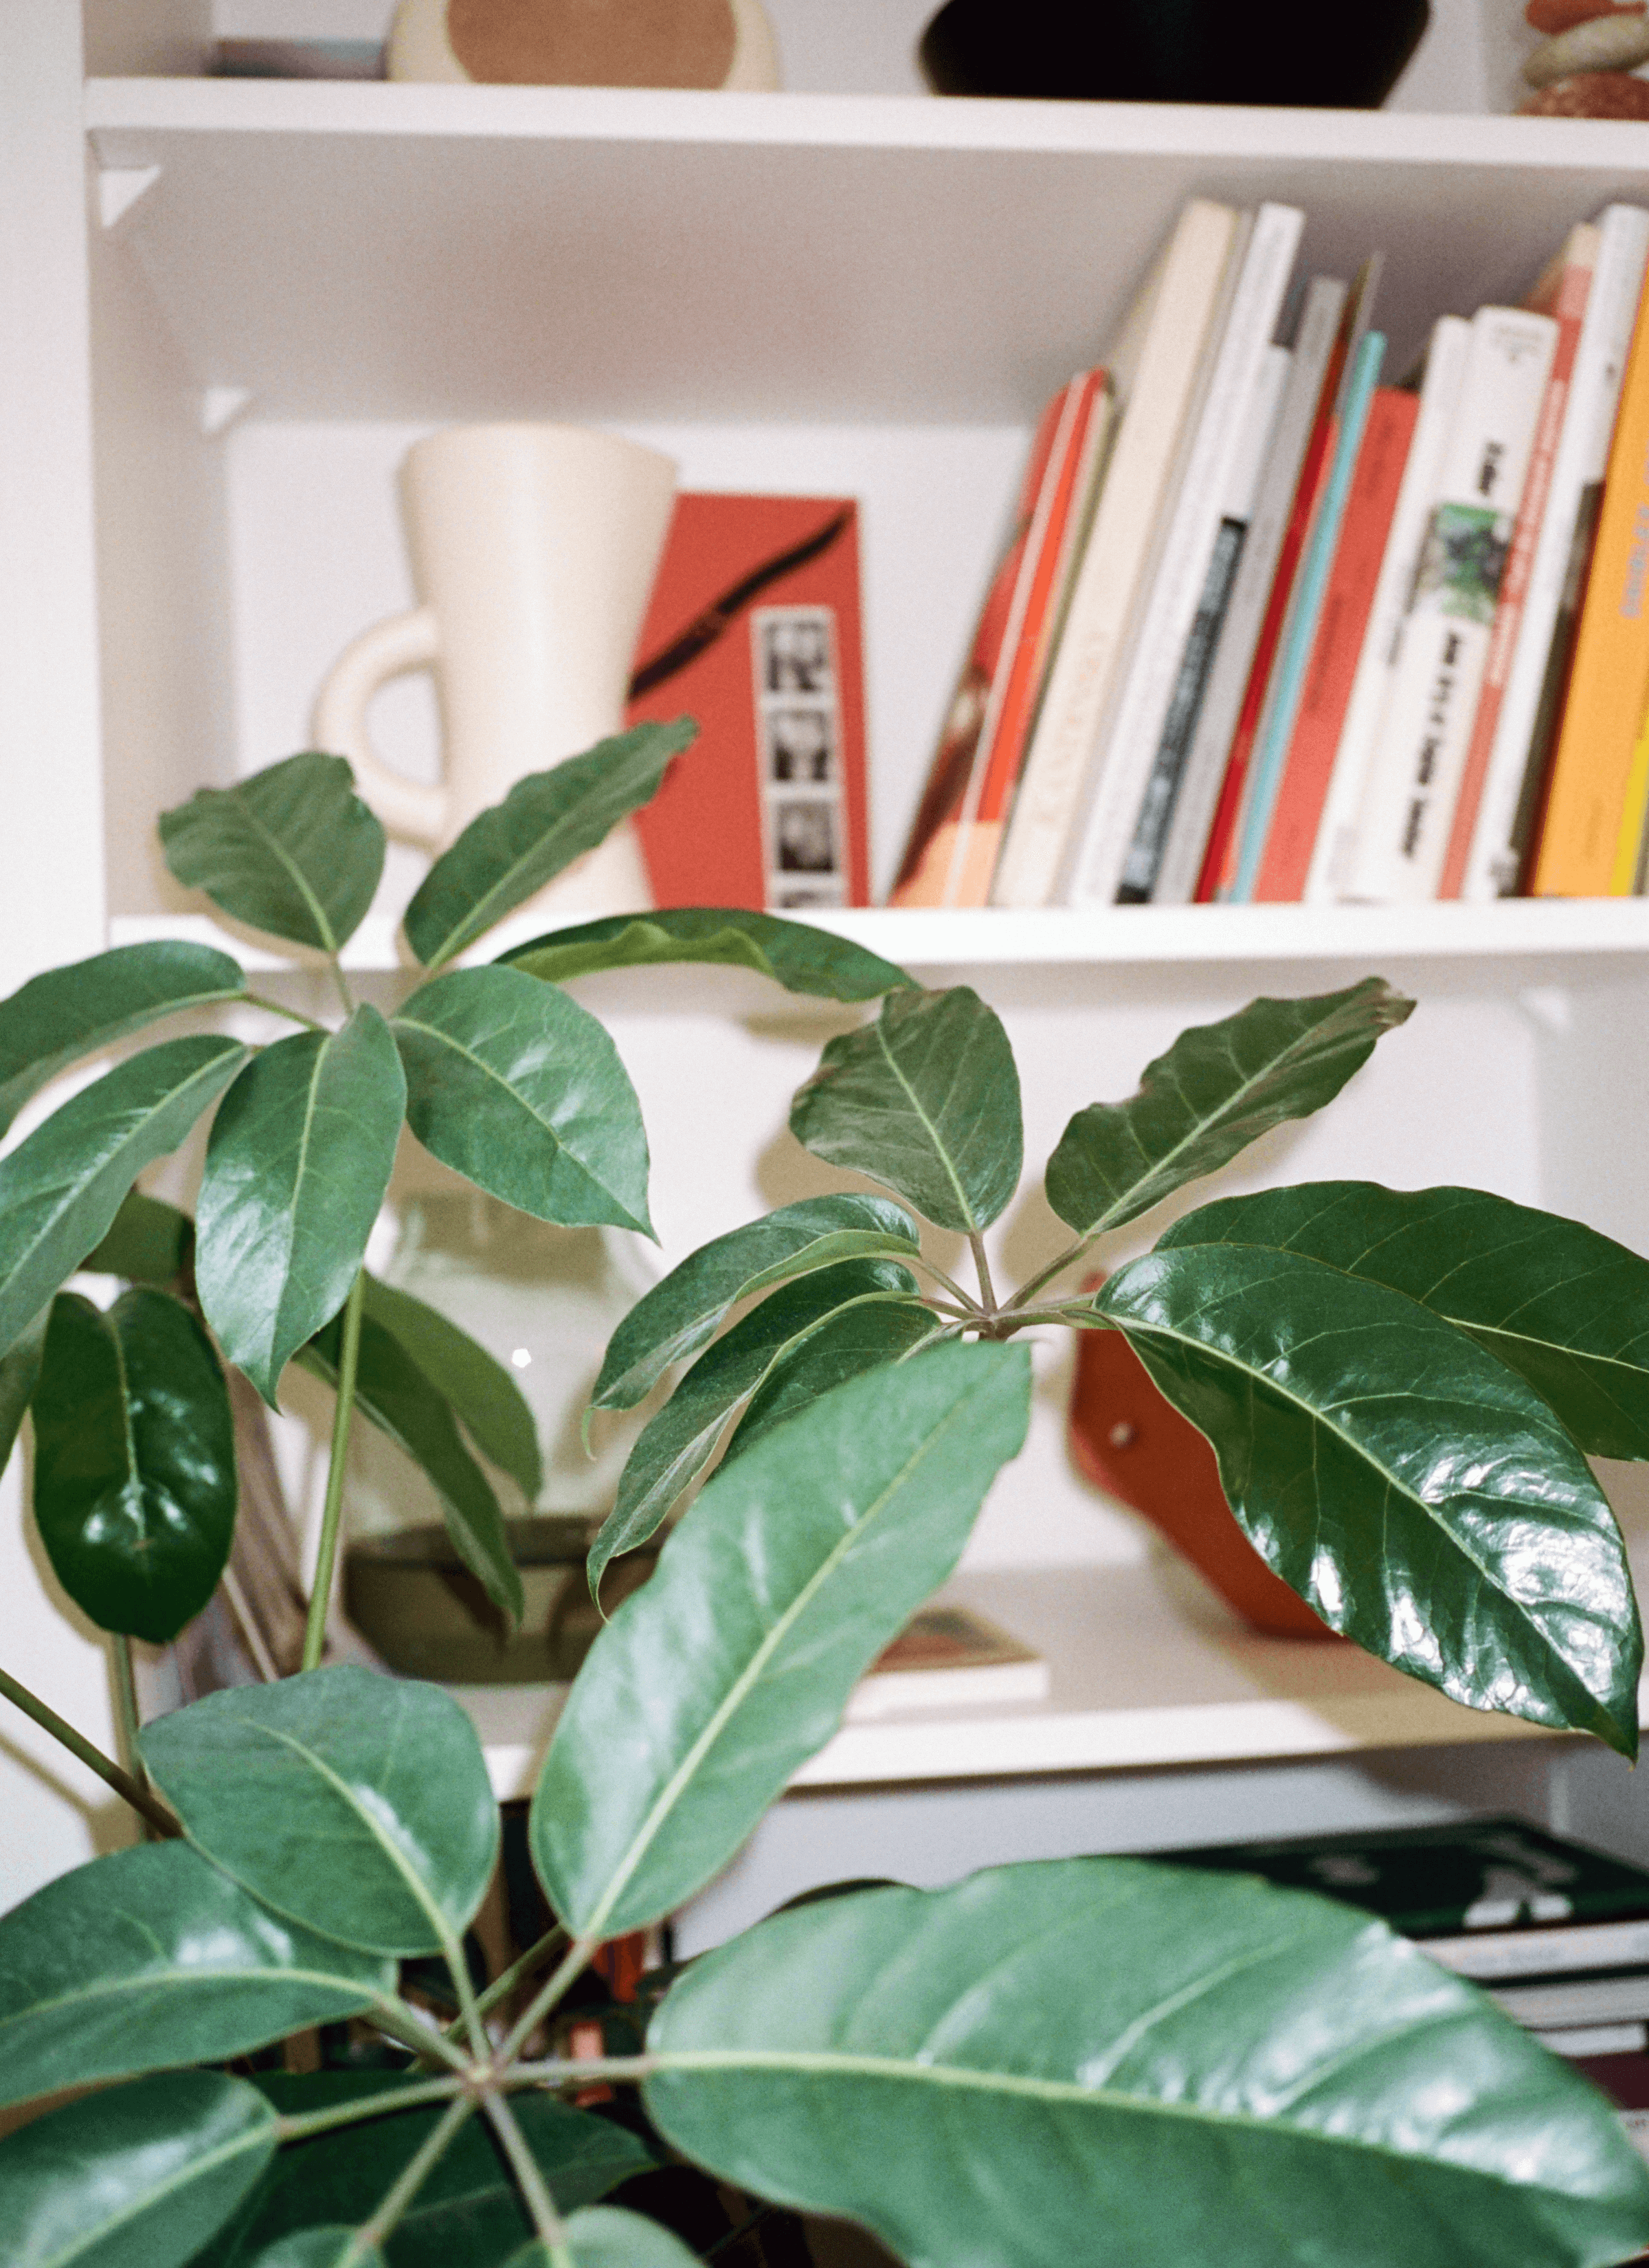 An umbrella tree leaves in front of a shelf of books and some ceramic-like vessels.